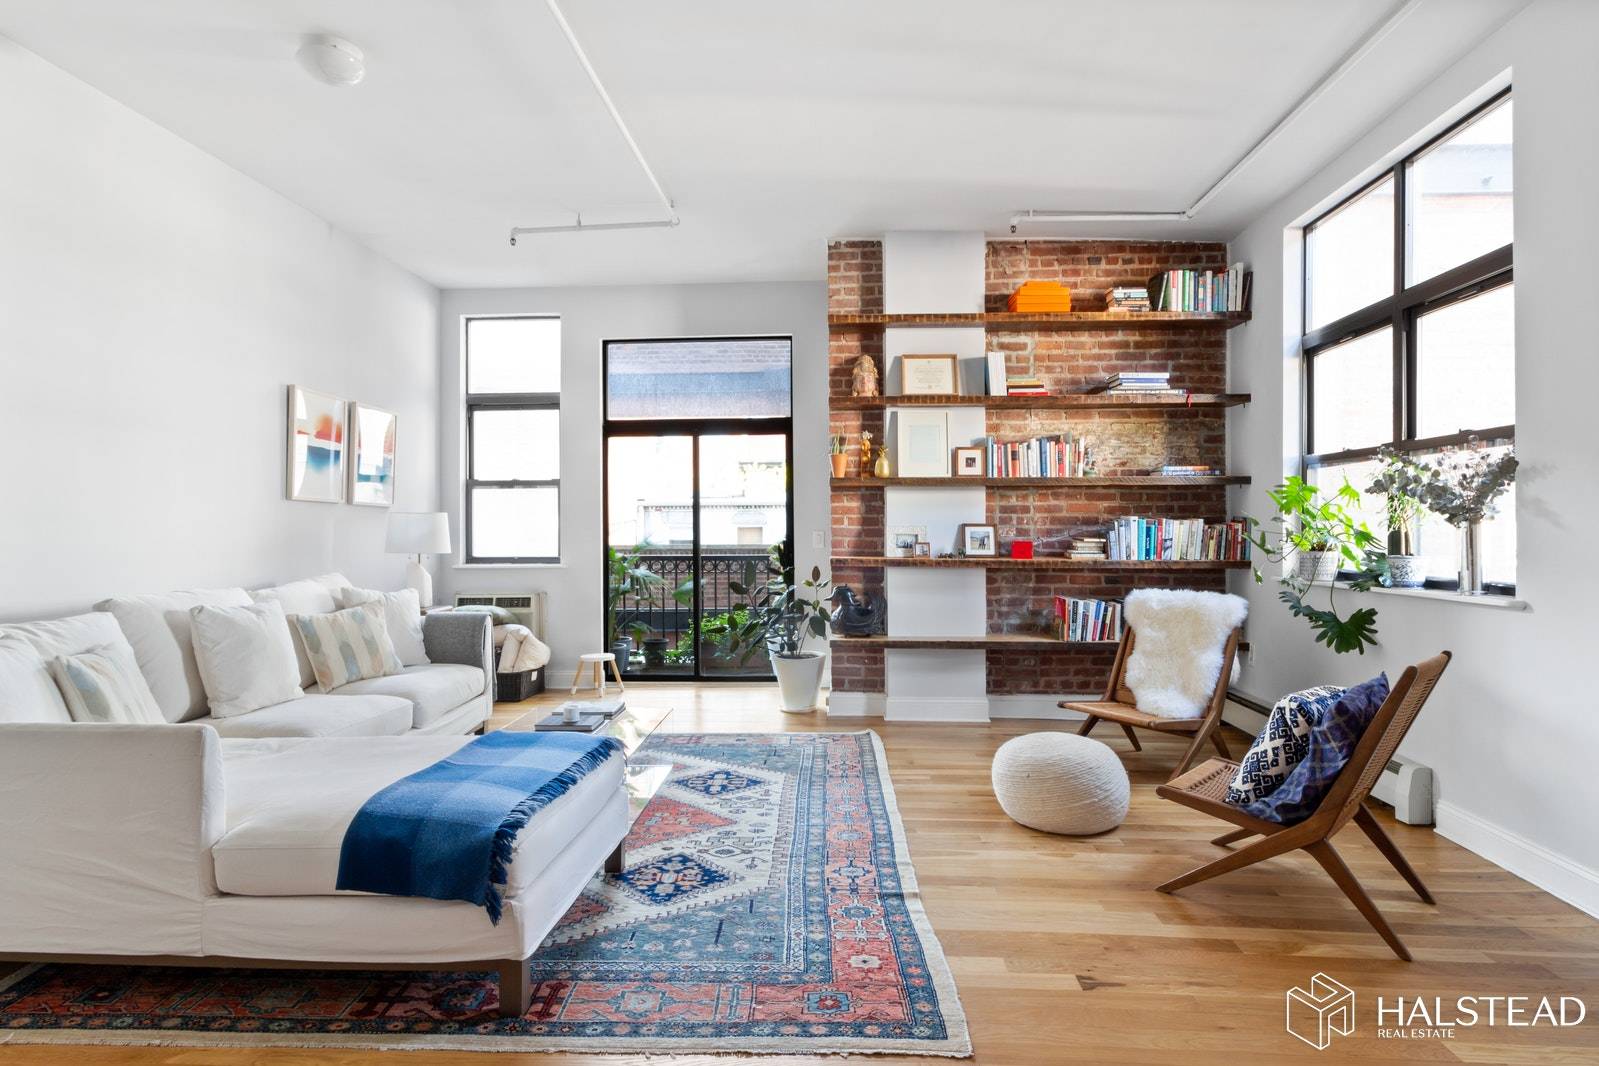 Do not miss this opportunity for the perfect Brooklyn loft !